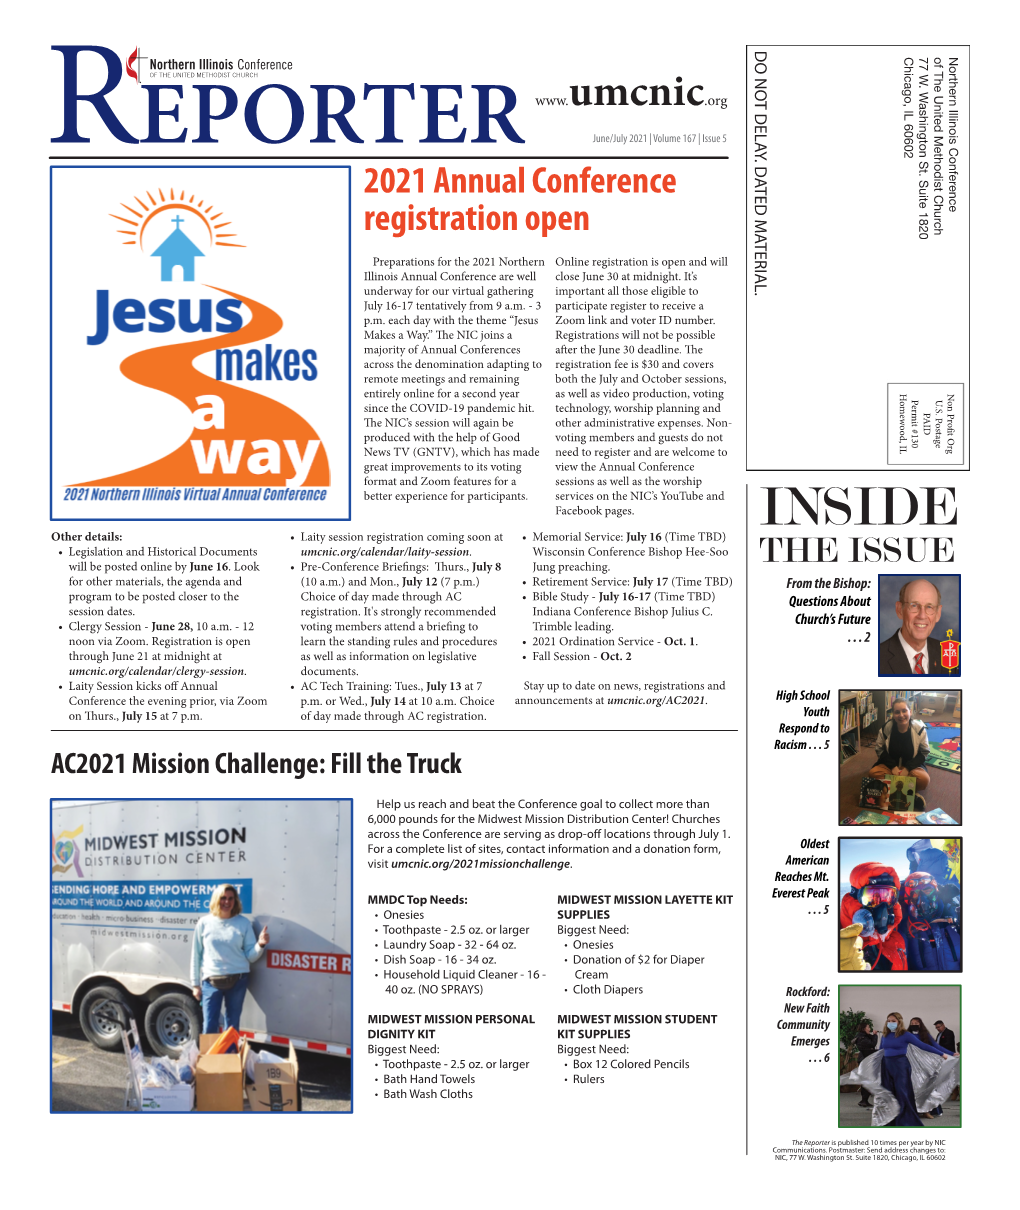 REPORTER June/July 2021 | Volume 167 | Issue 5